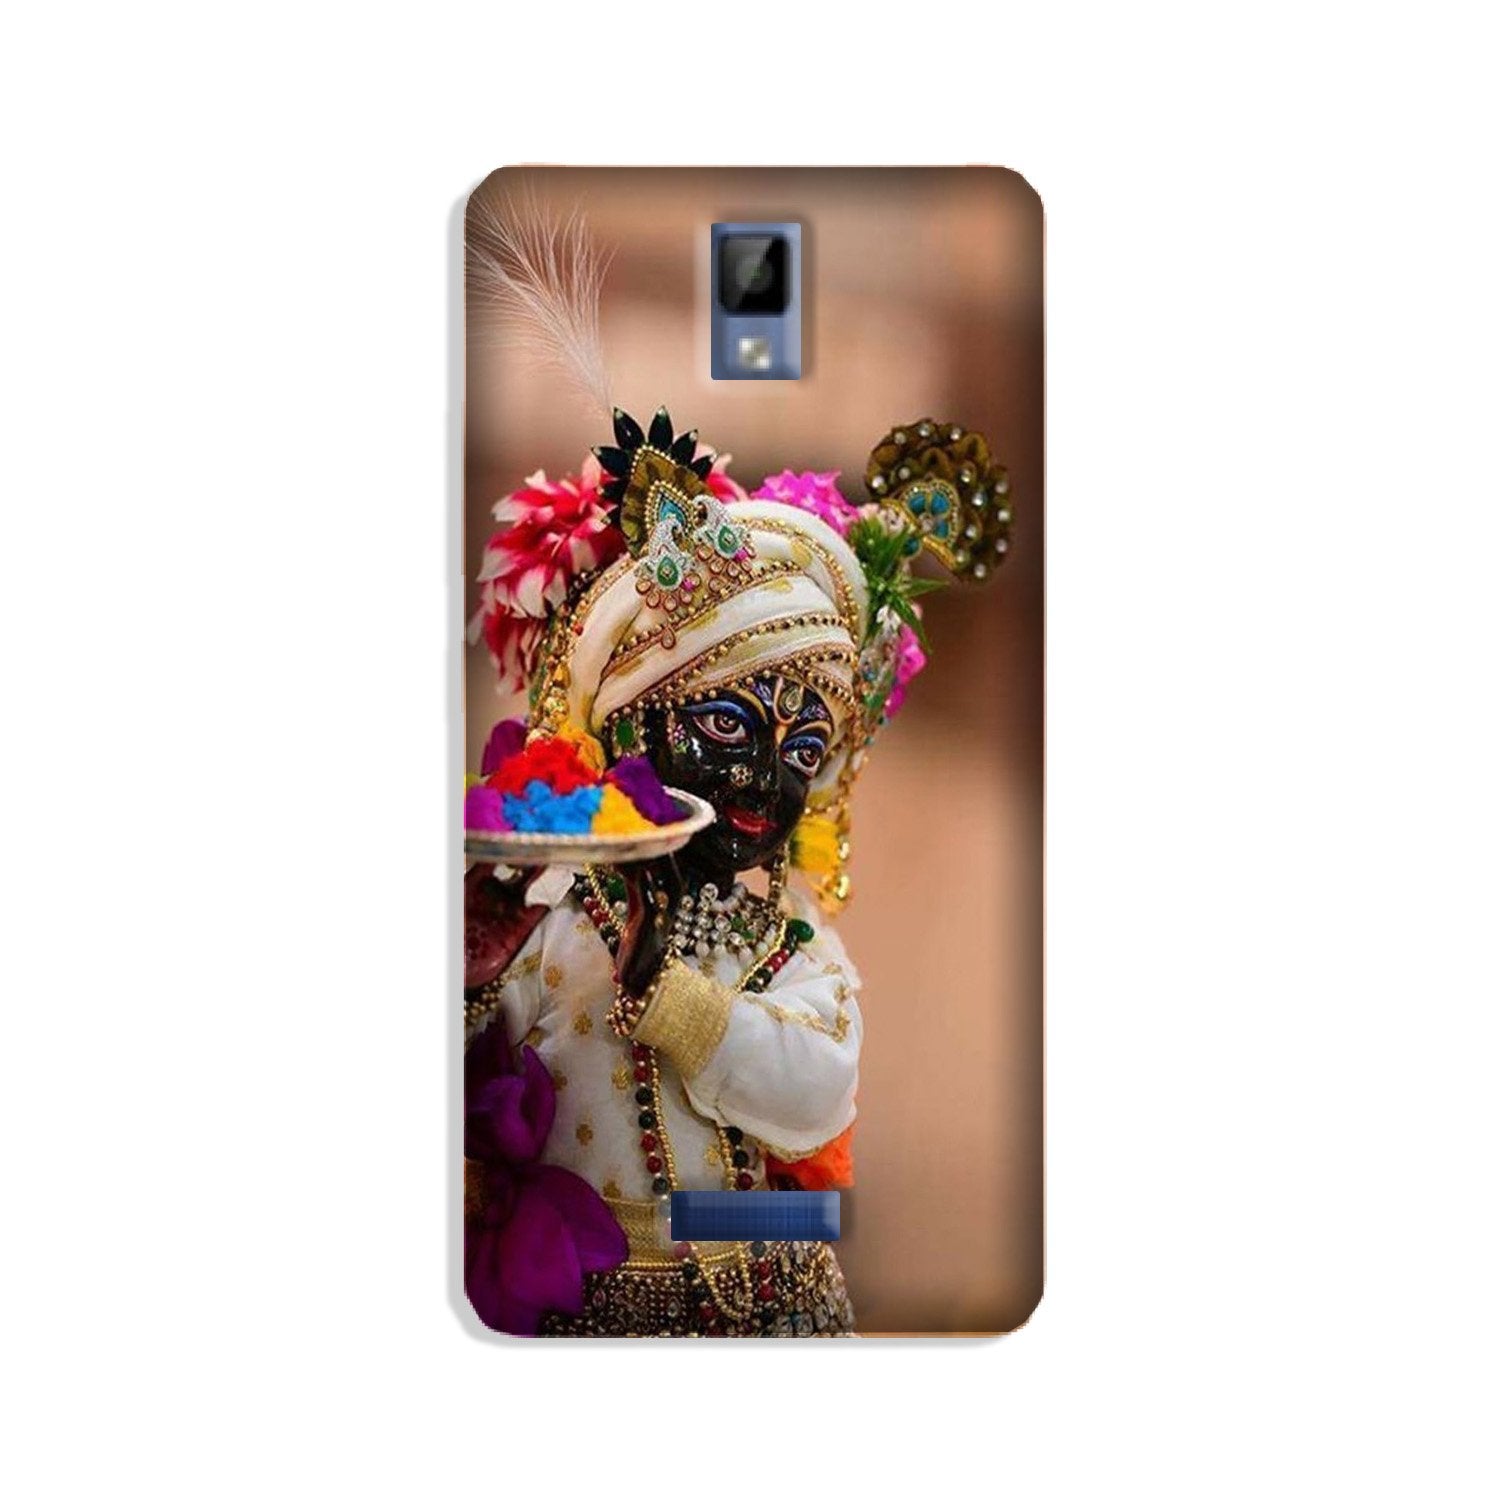 Lord Krishna2 Case for Gionee P7